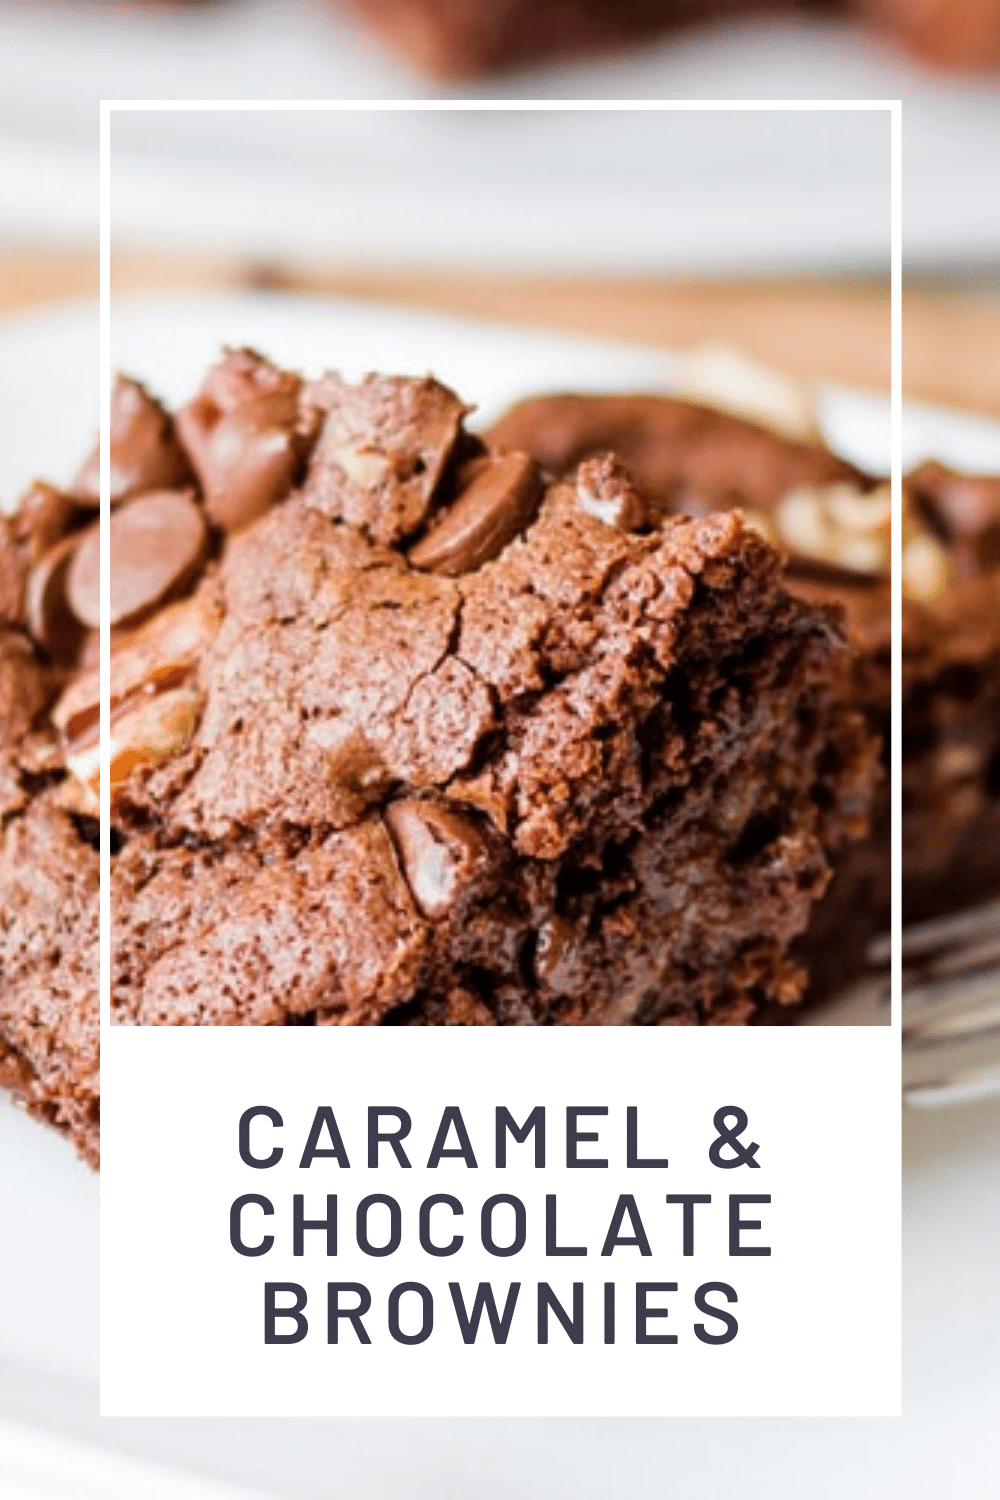 Chocolate and caramel brownies are a match made in heaven. Add pecans and you have unbeatable brownie recipe that are perfect for any occasion! These homemade brownies are made from scratch, so you know they're good. Plus, this recipe is so easy to make too! via @somewhatsimple